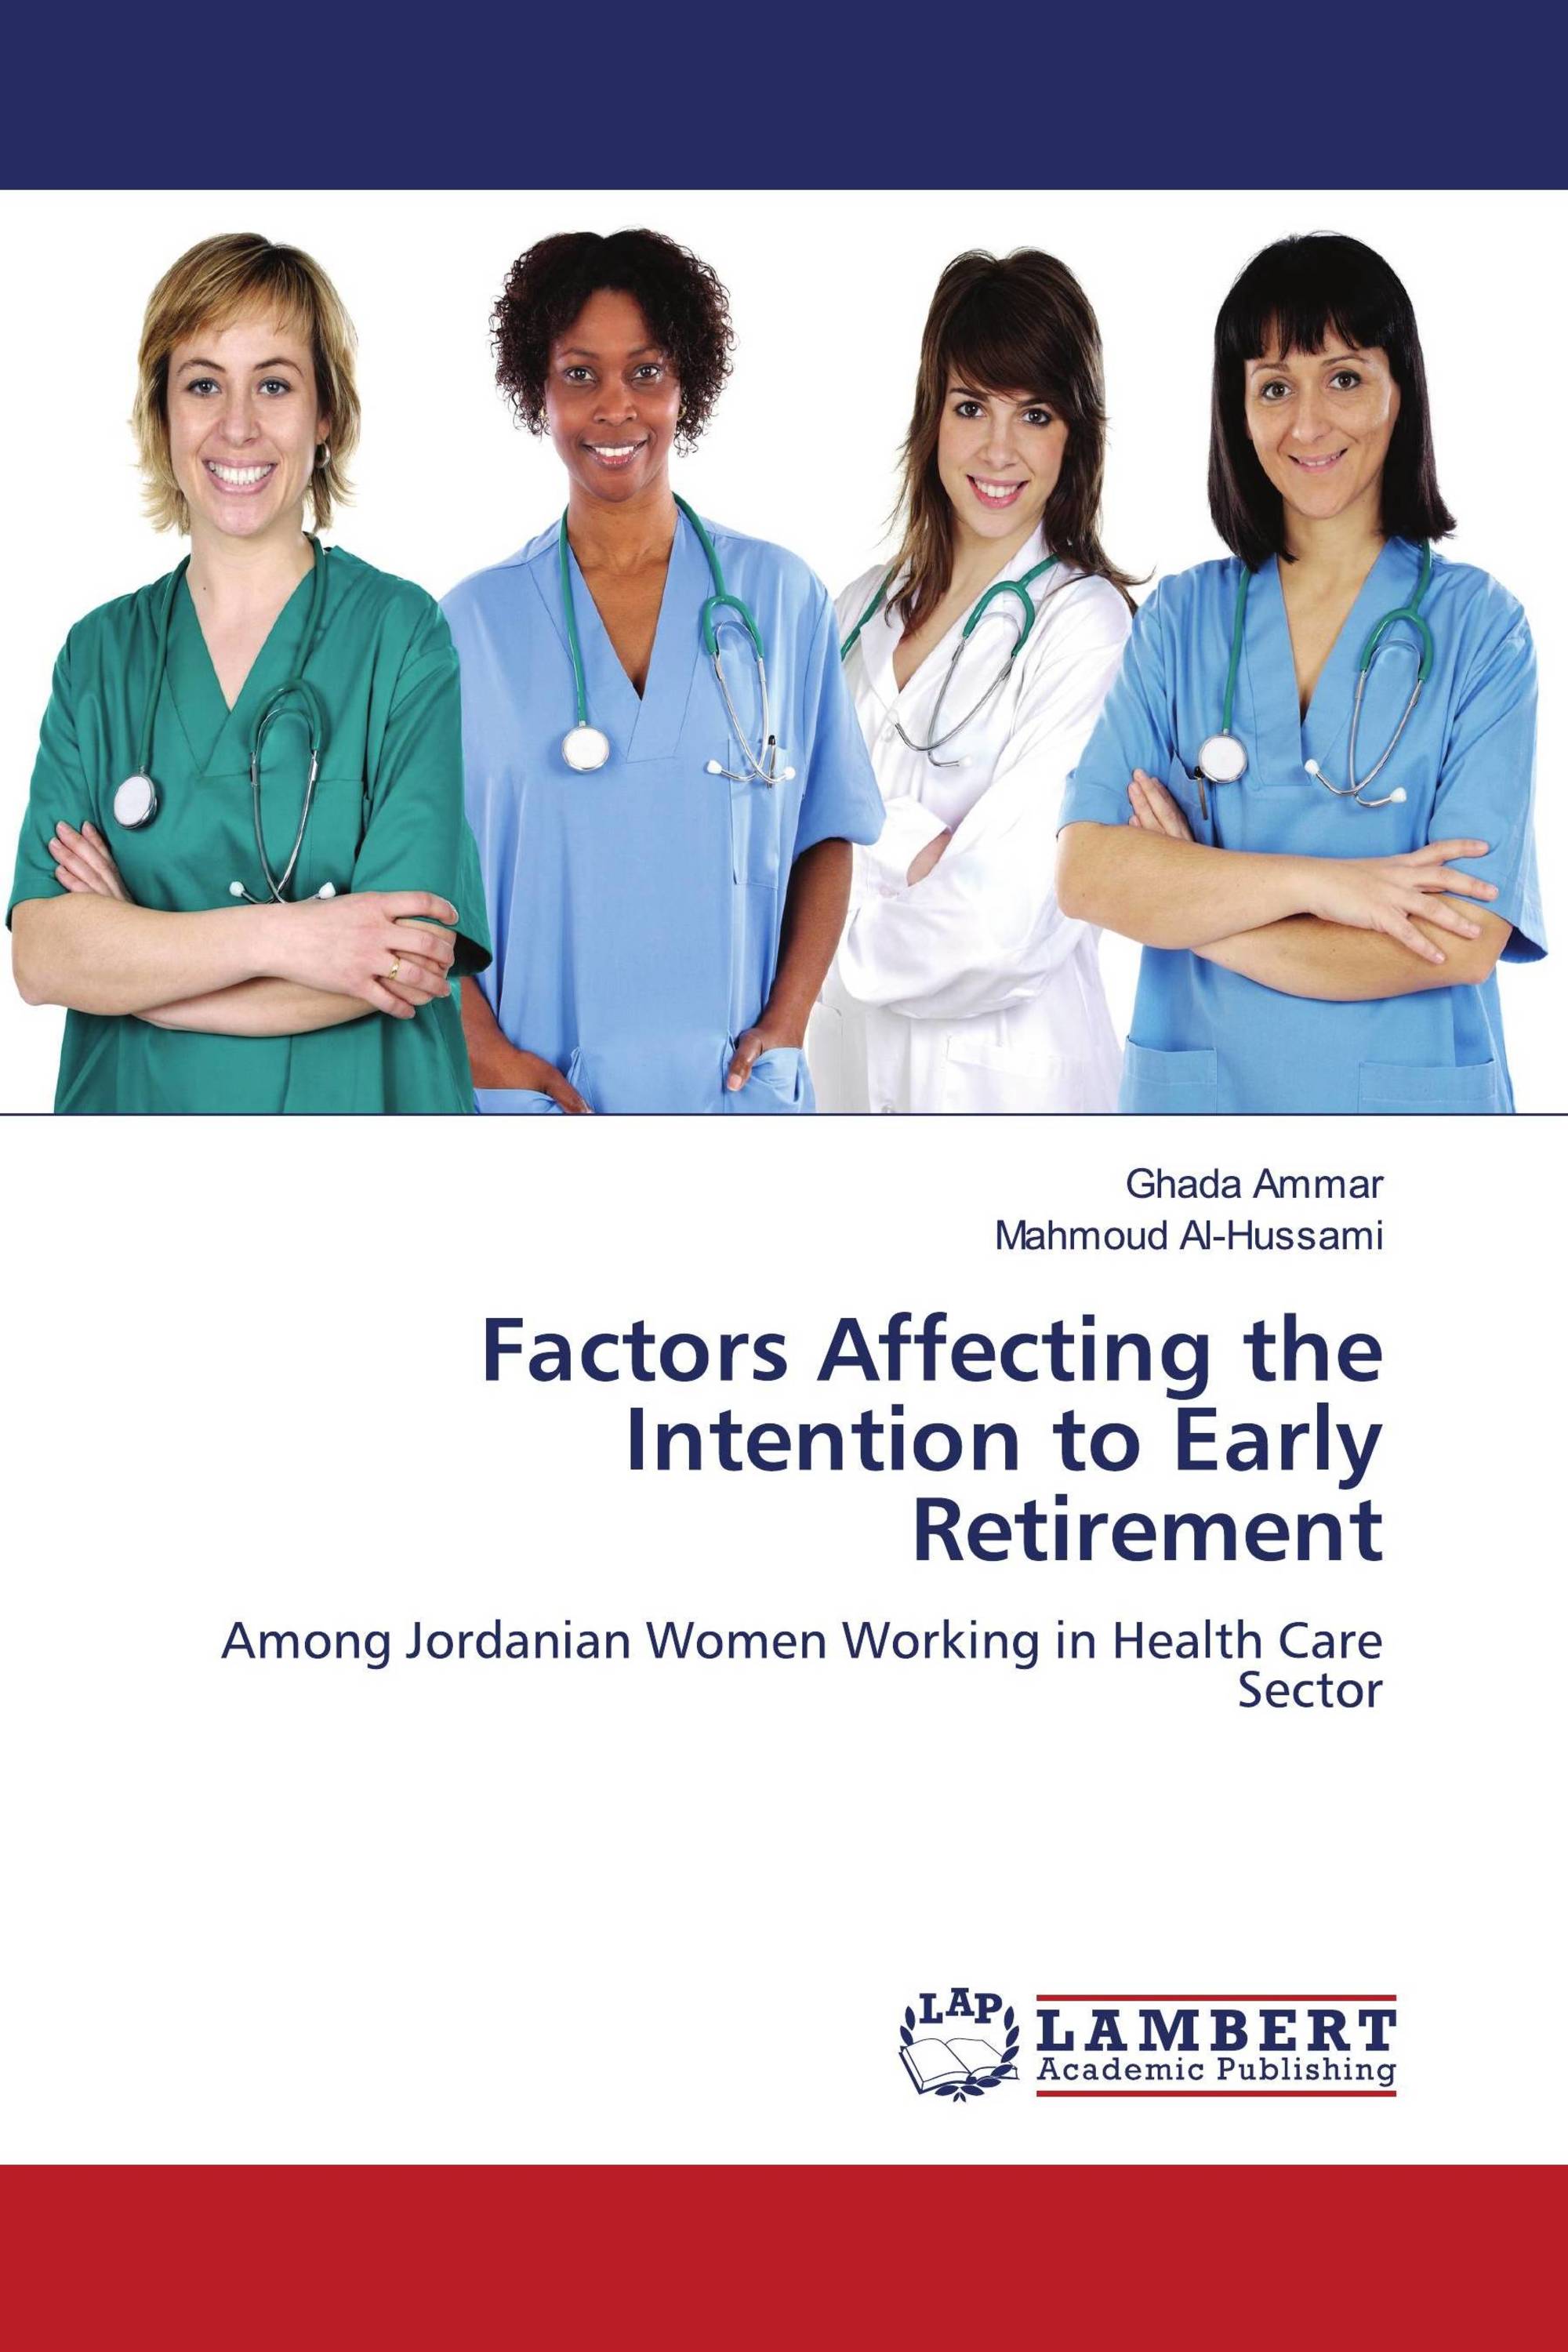 Factors Affecting the Intention to Early Retirement